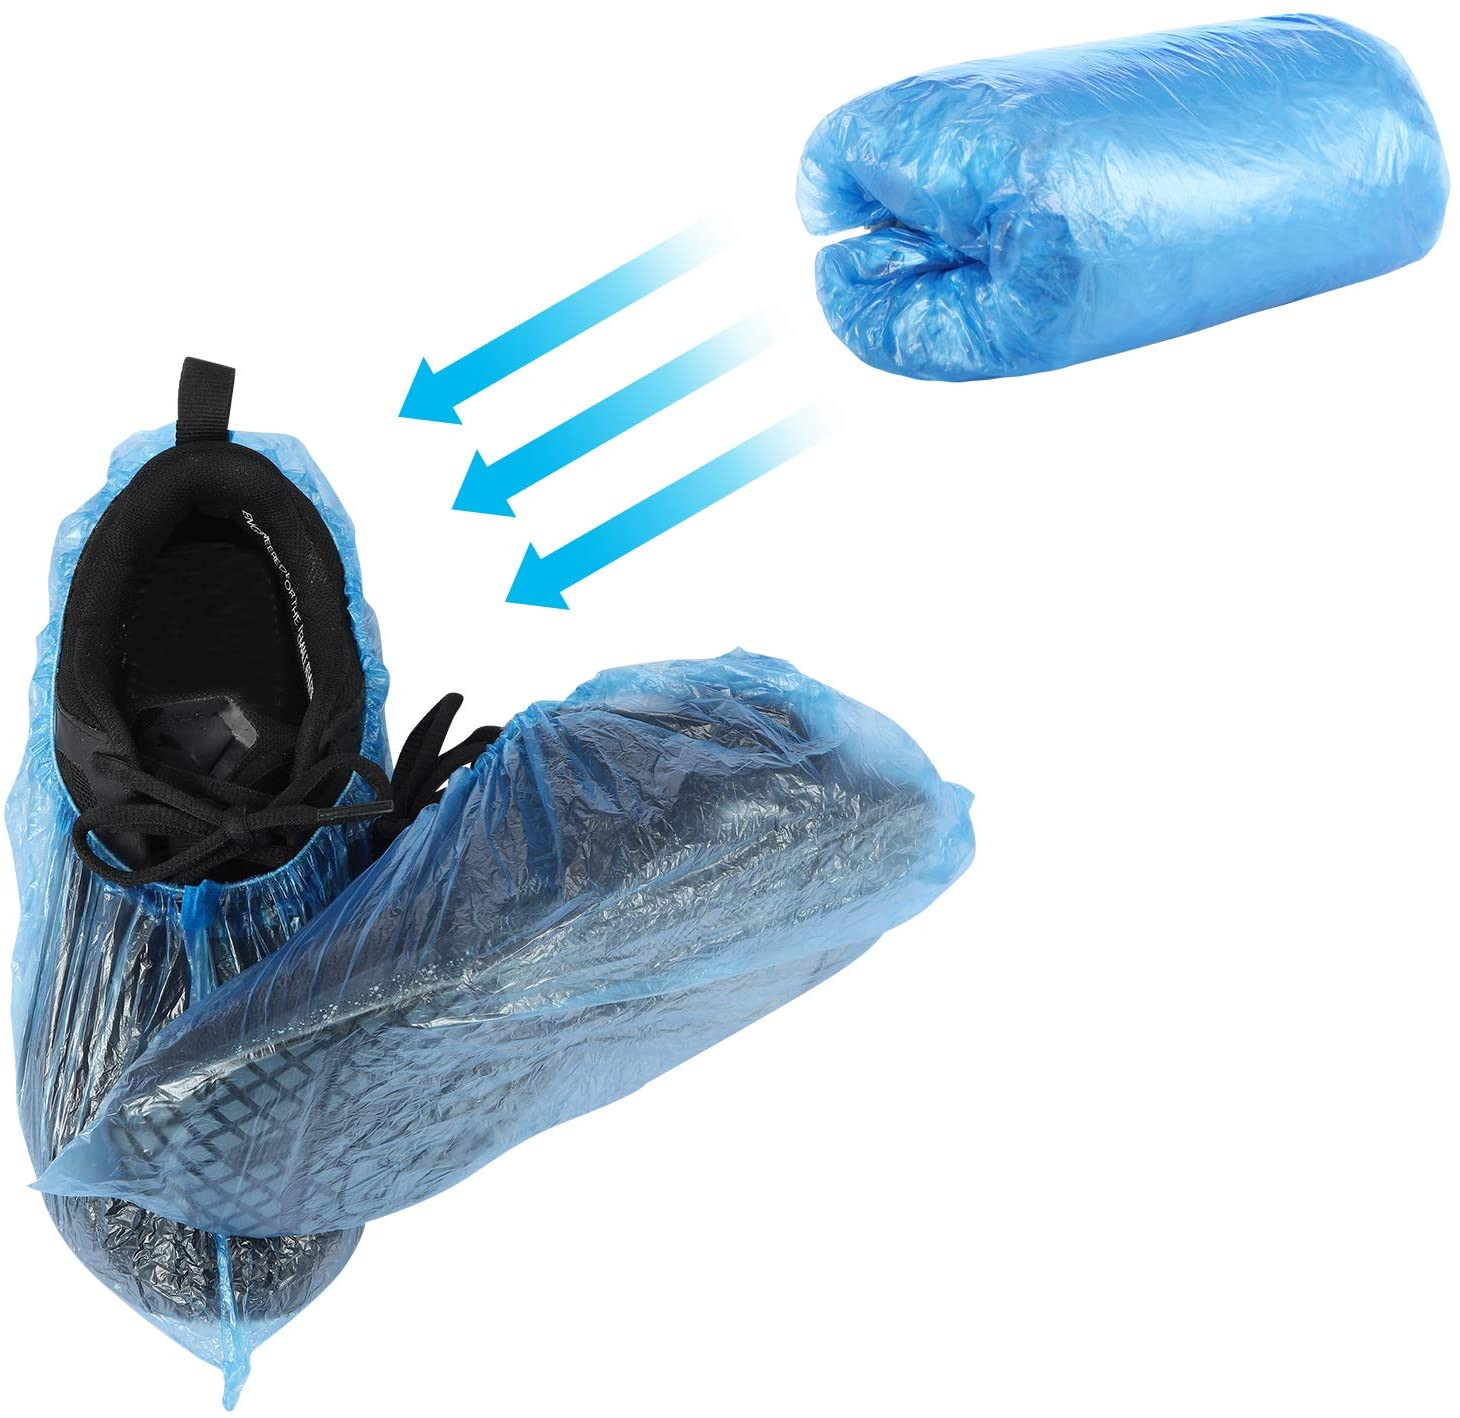 Disposable 200 Pack Shoe Covers Hygienic Boot Cover for Workplace, Indoor Carpet